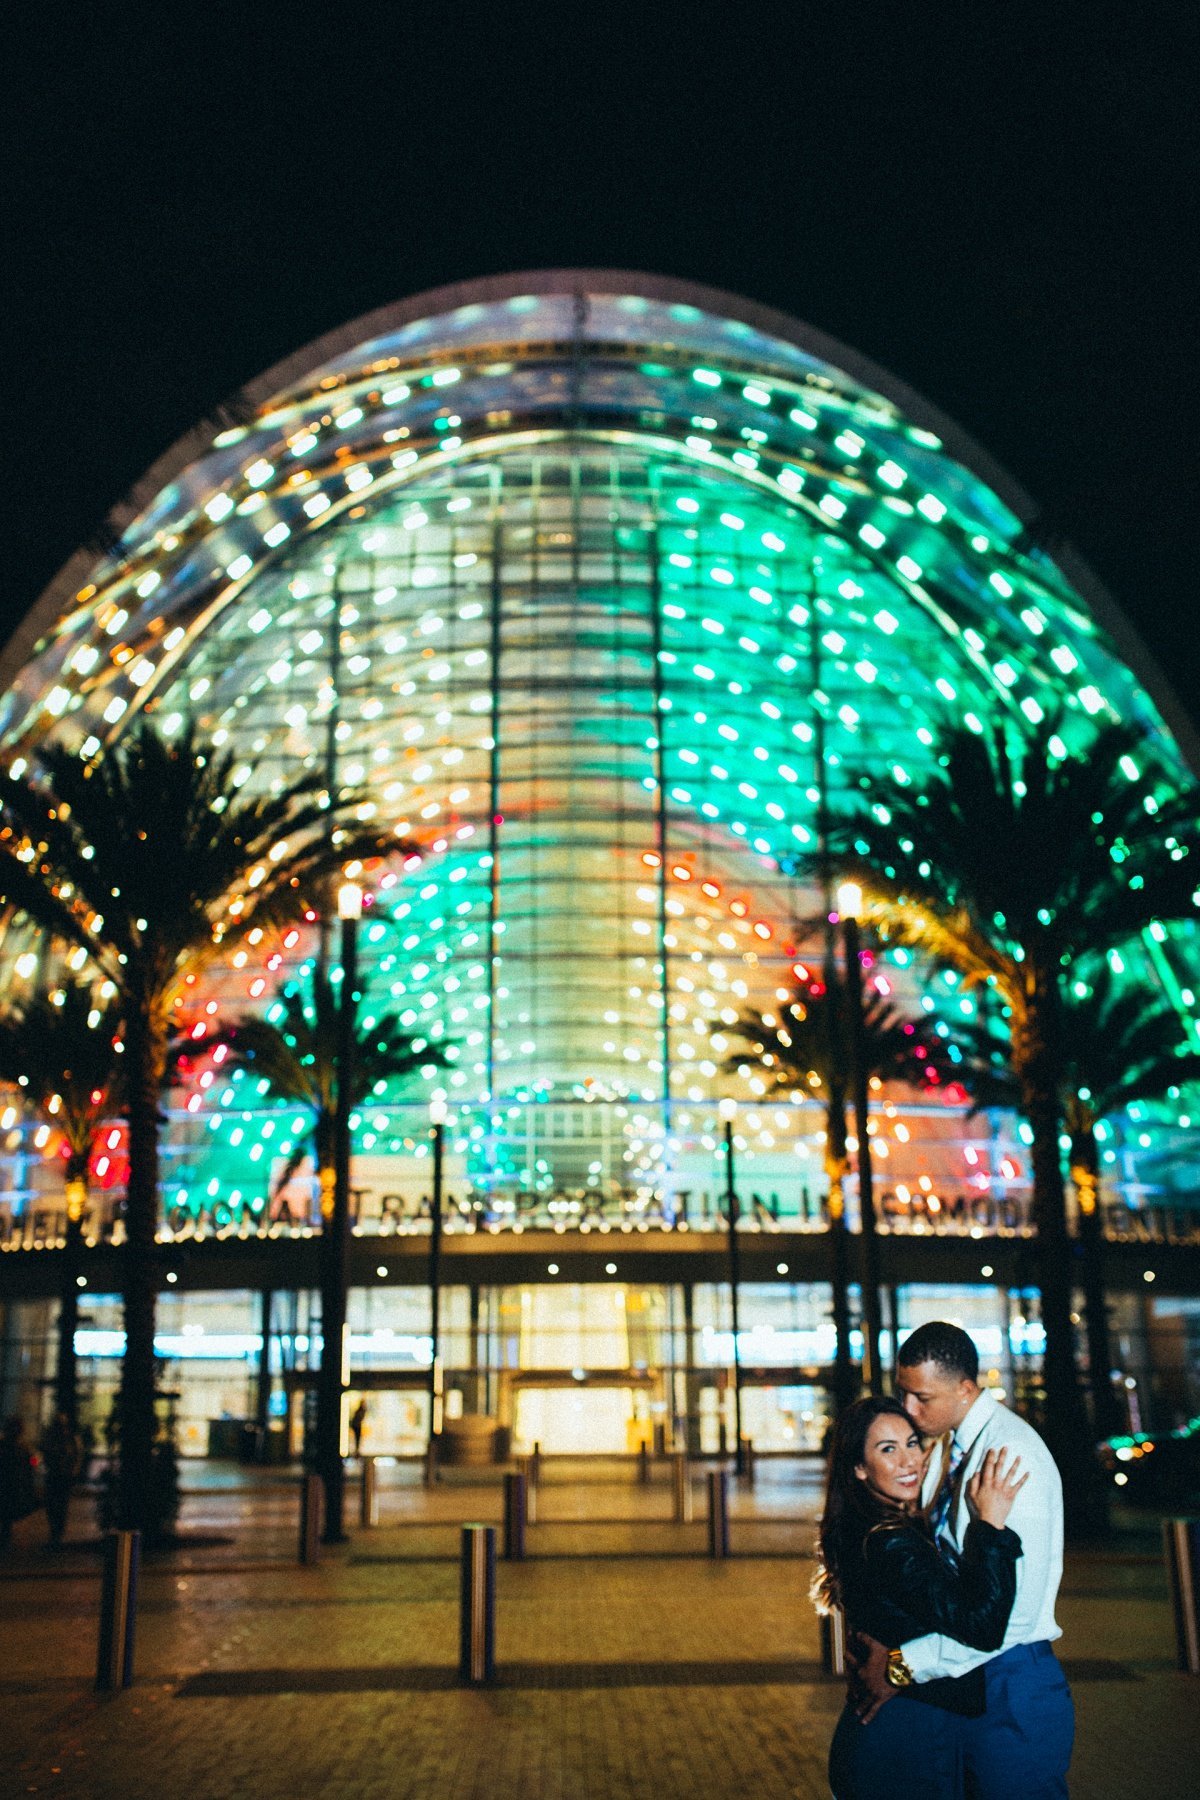 Groom to be kisses his Bride's head as she smiles for the camera at night in front of the colorful ARTIC Train Station at night